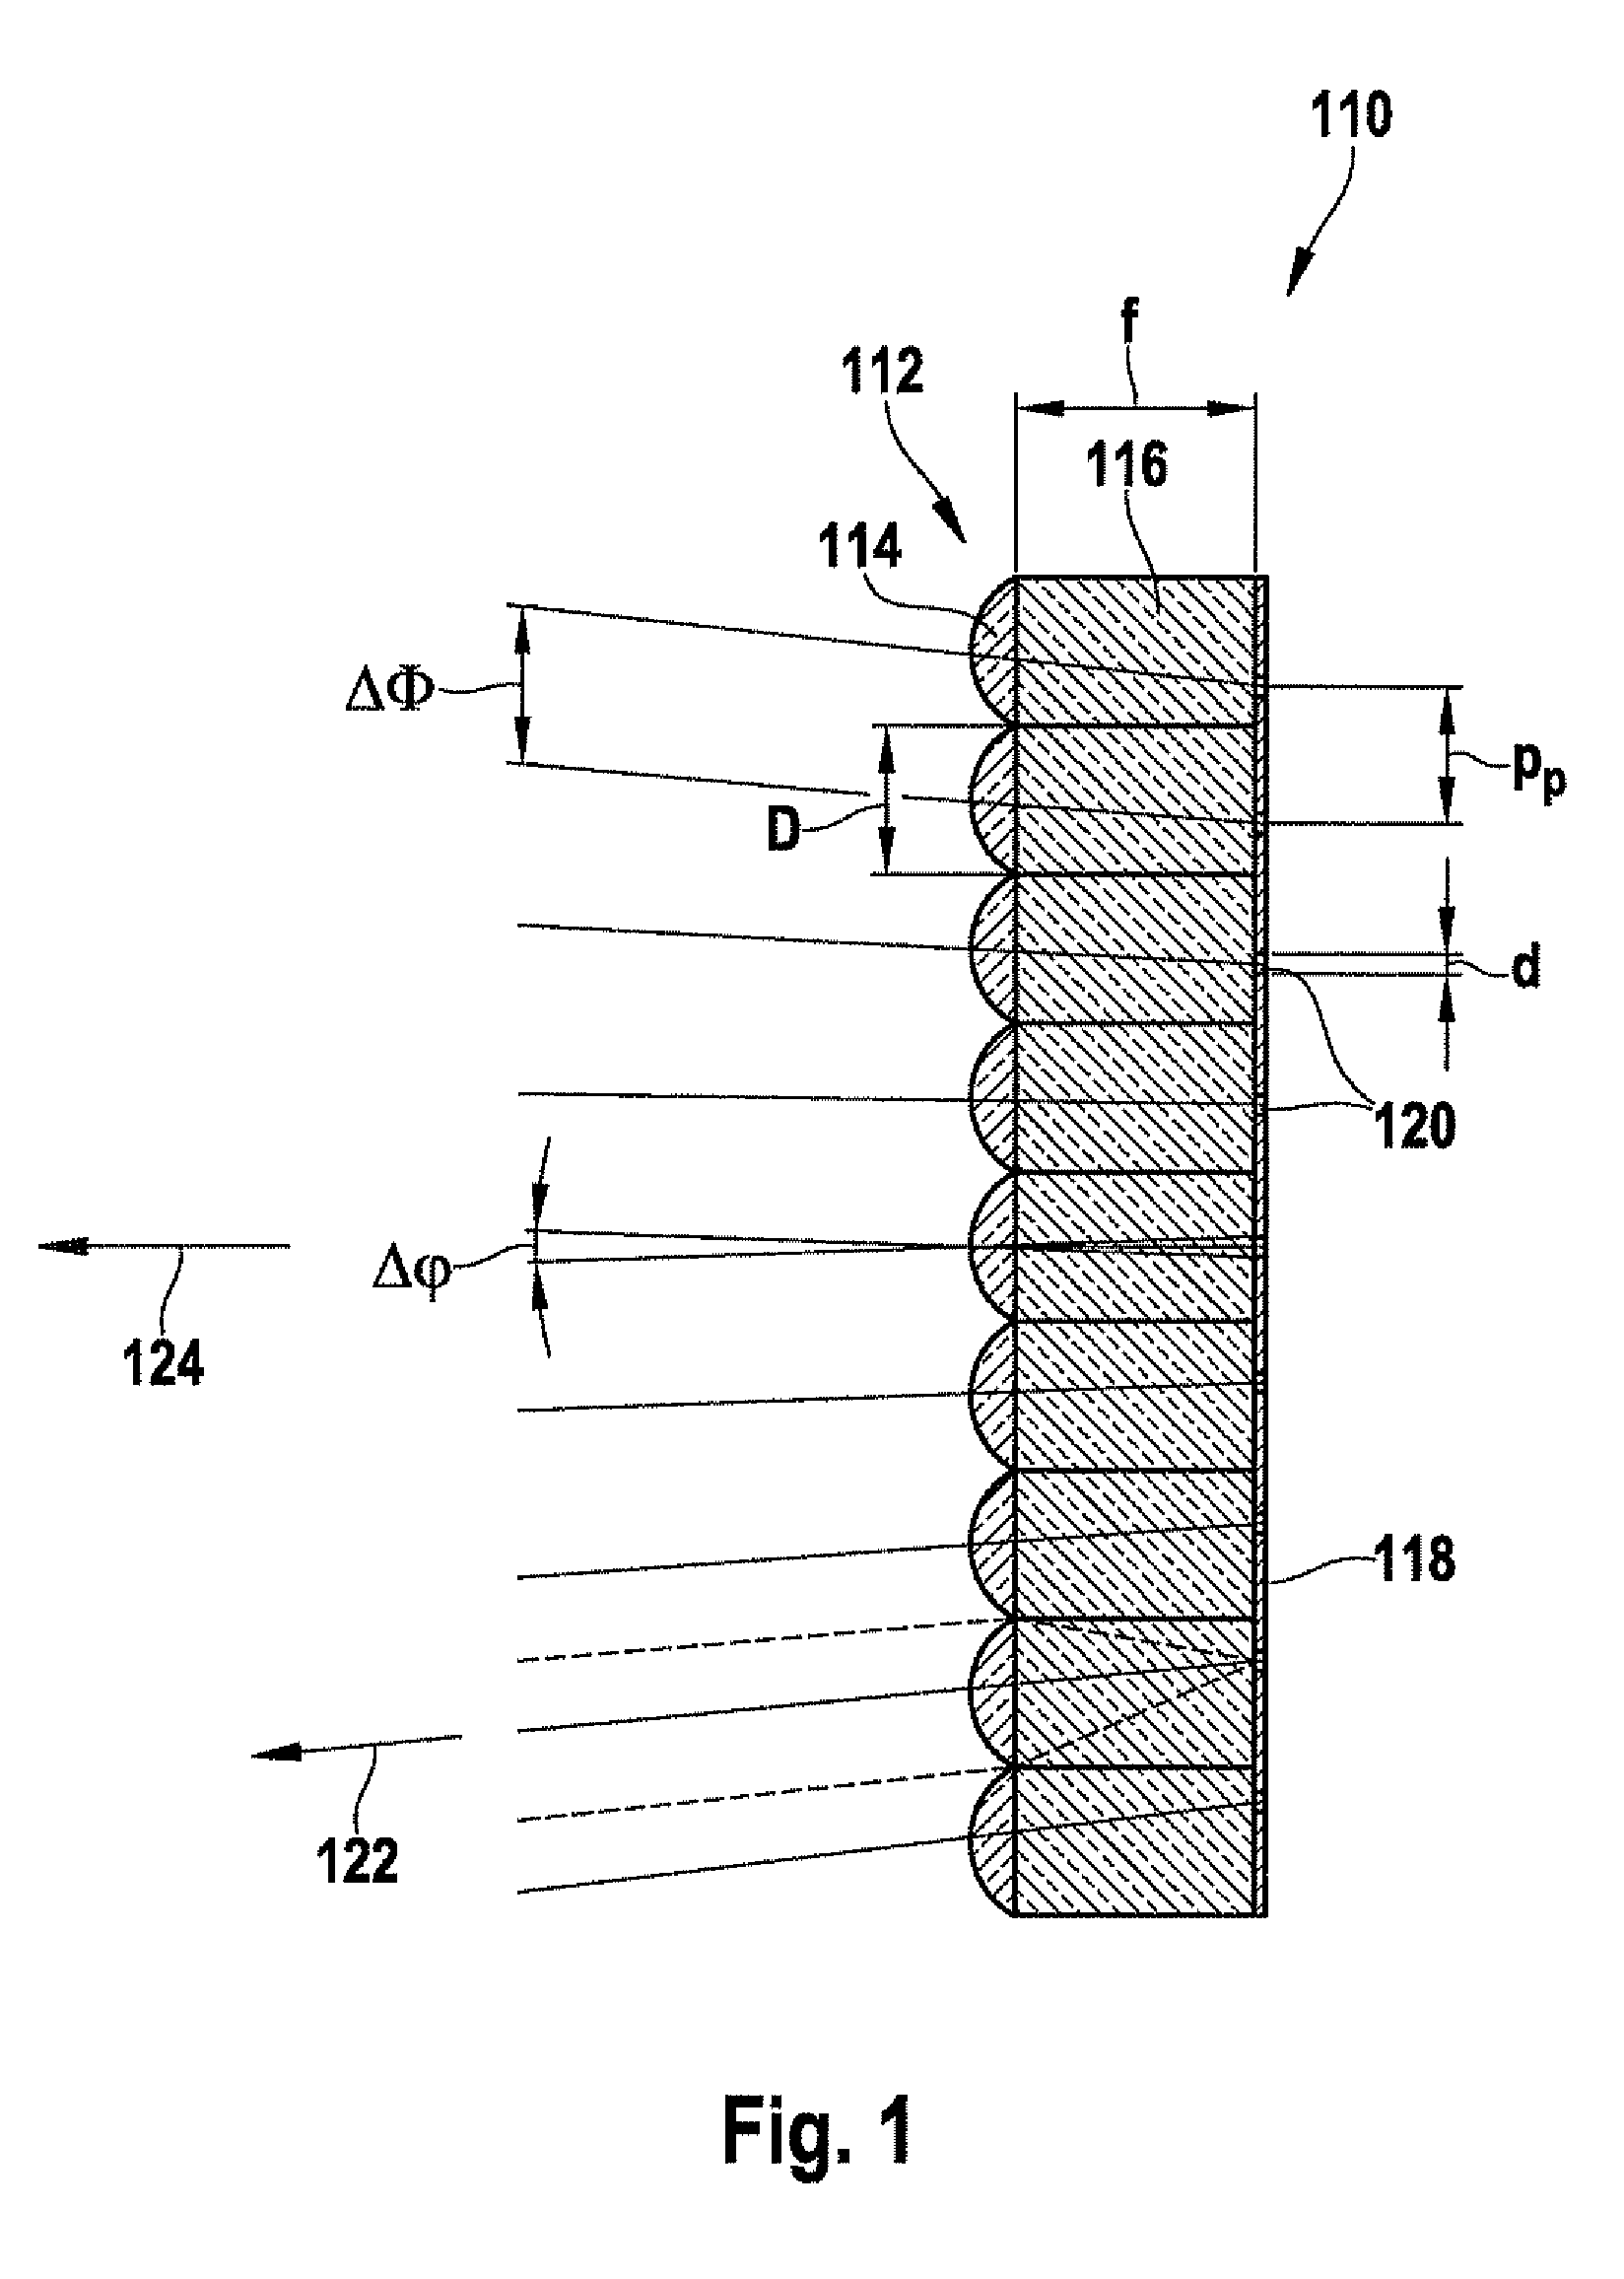 Image capture system for applications in vehicles